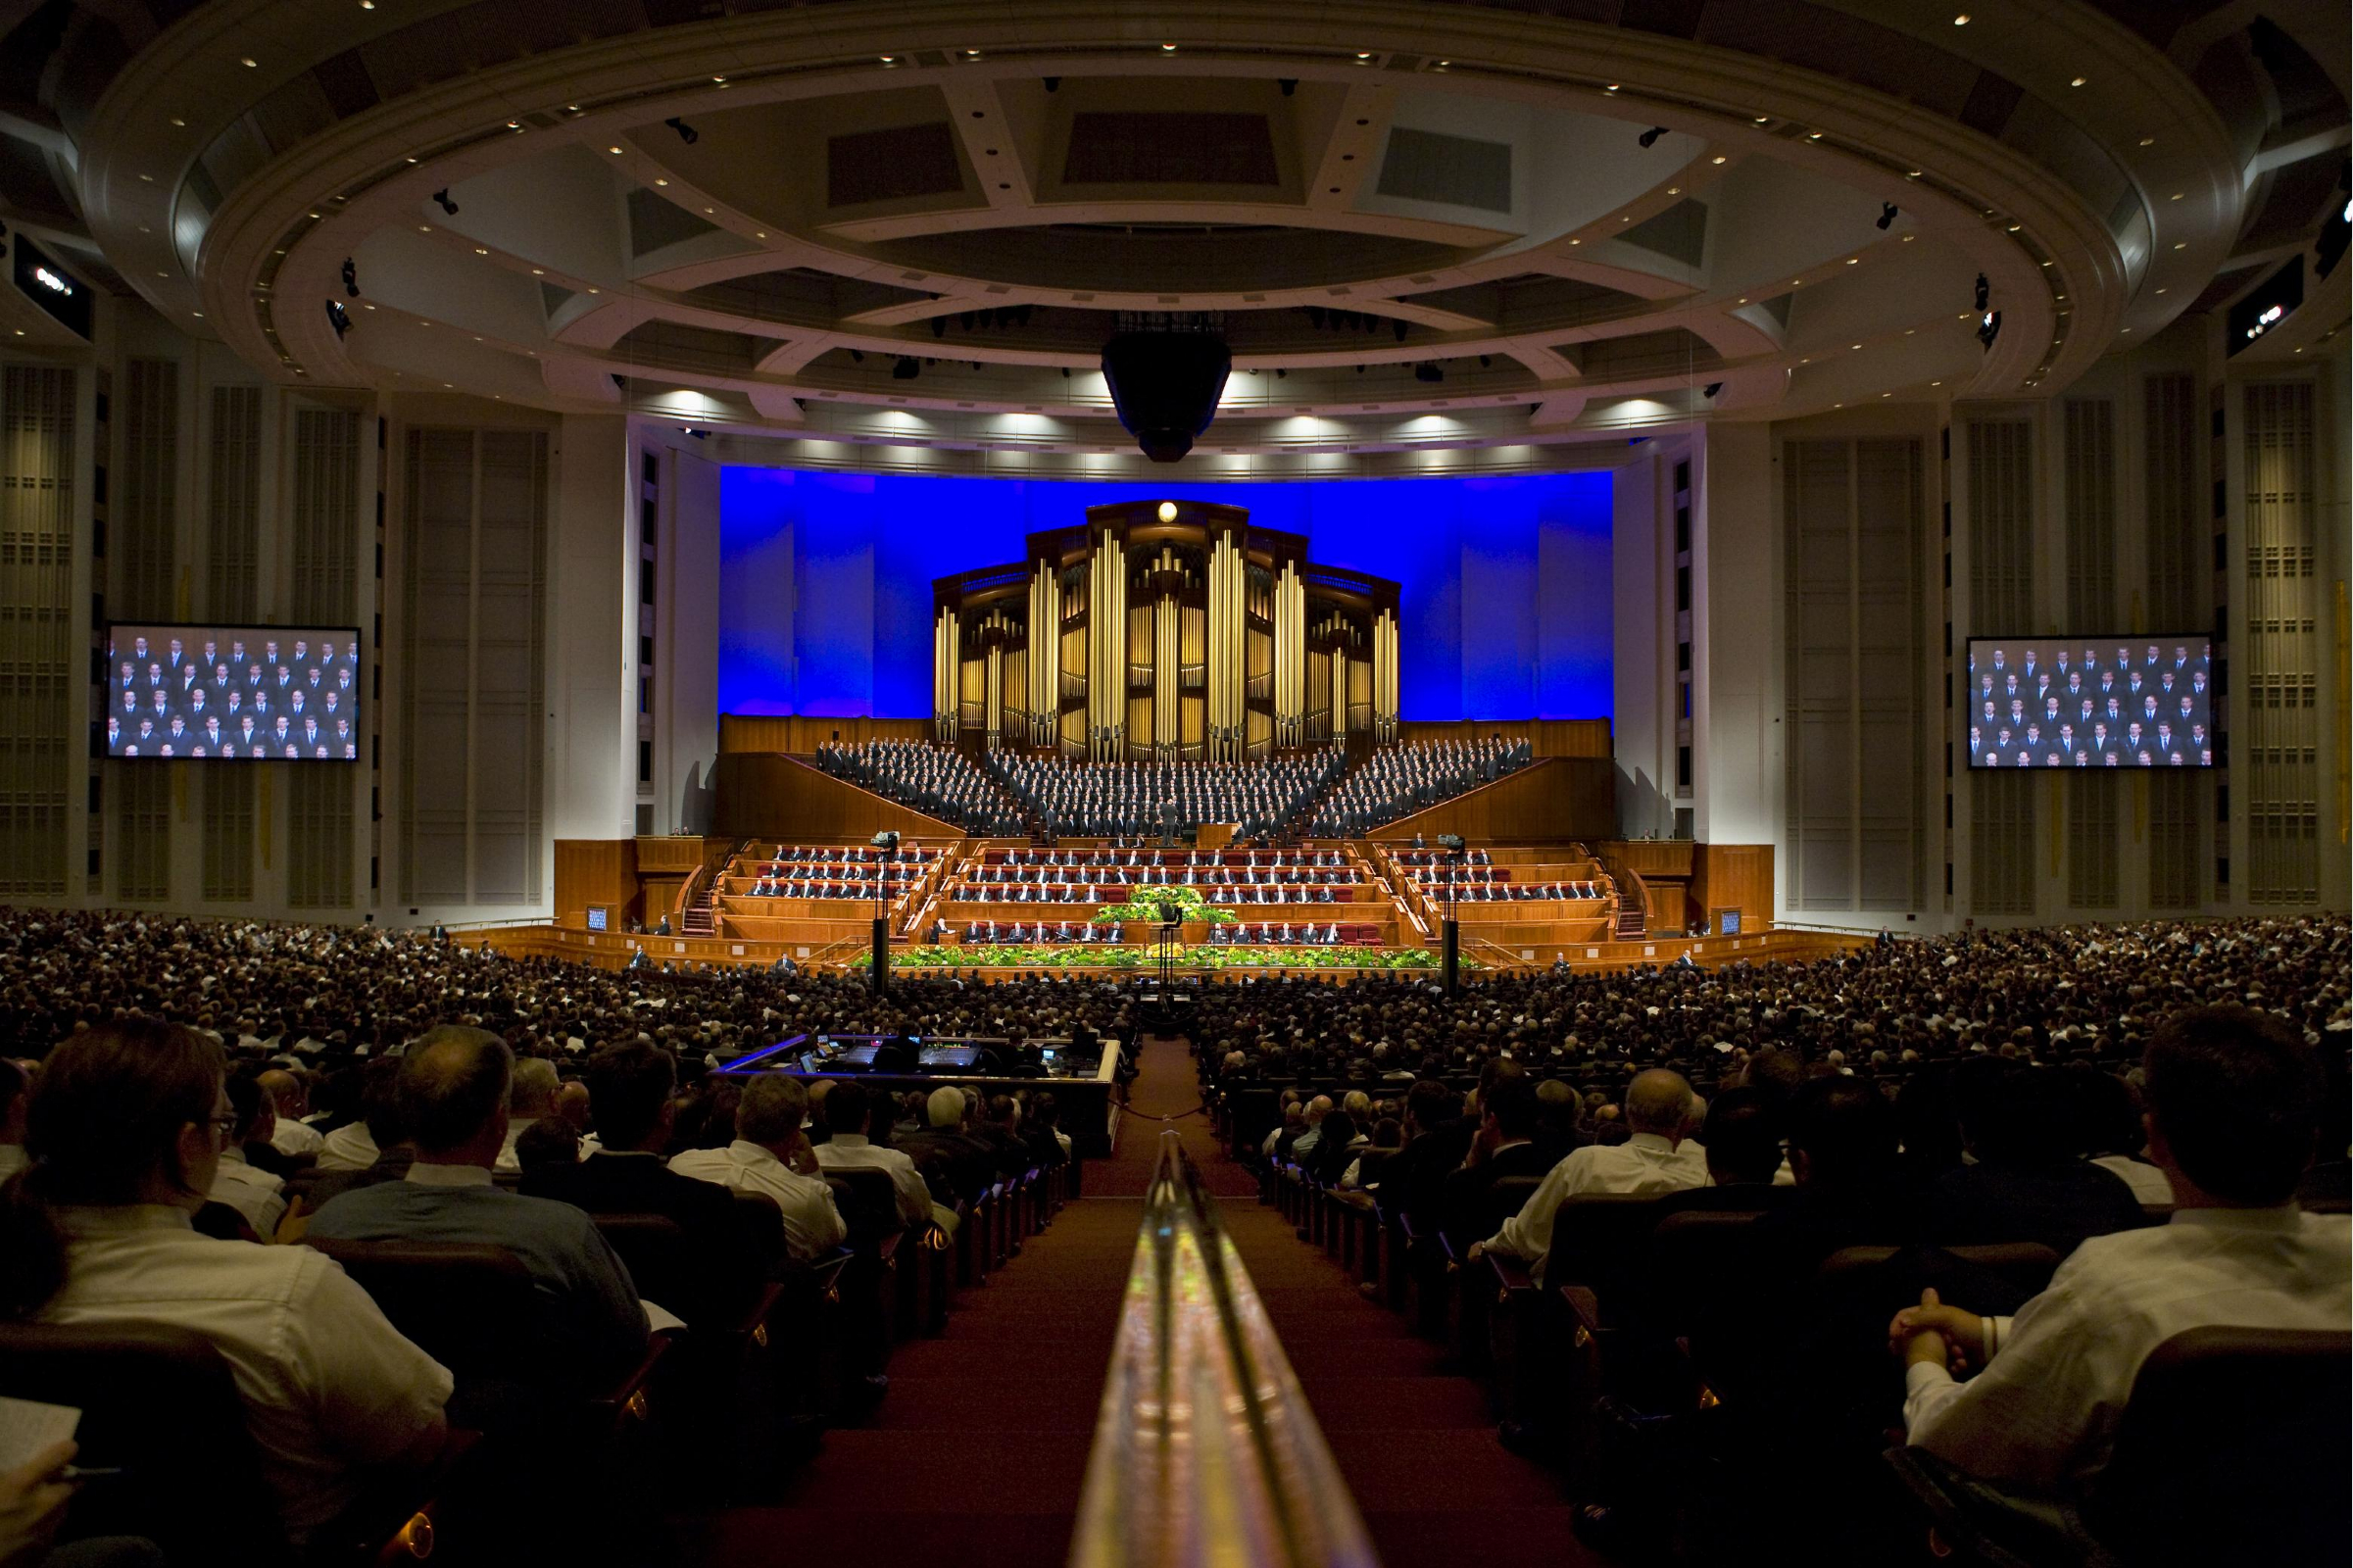 Lds General Conference 2024 Dates Val Cecilla